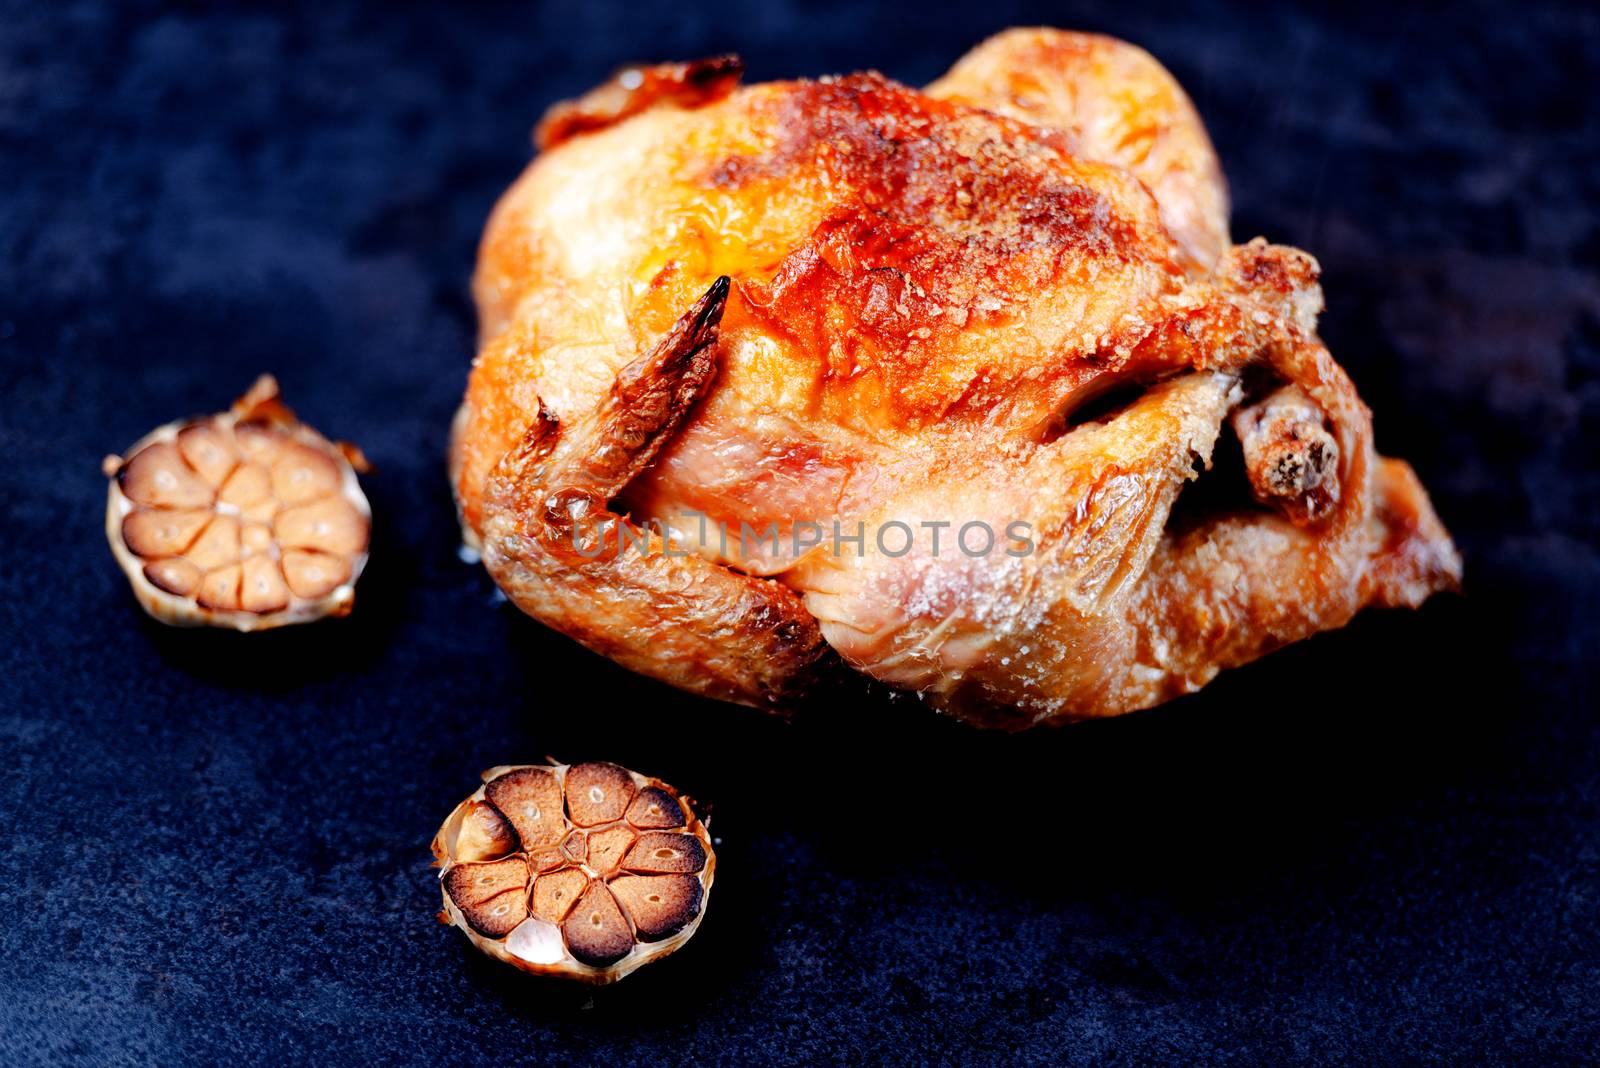 Whole oven roasted chicken with garlic on stone surface